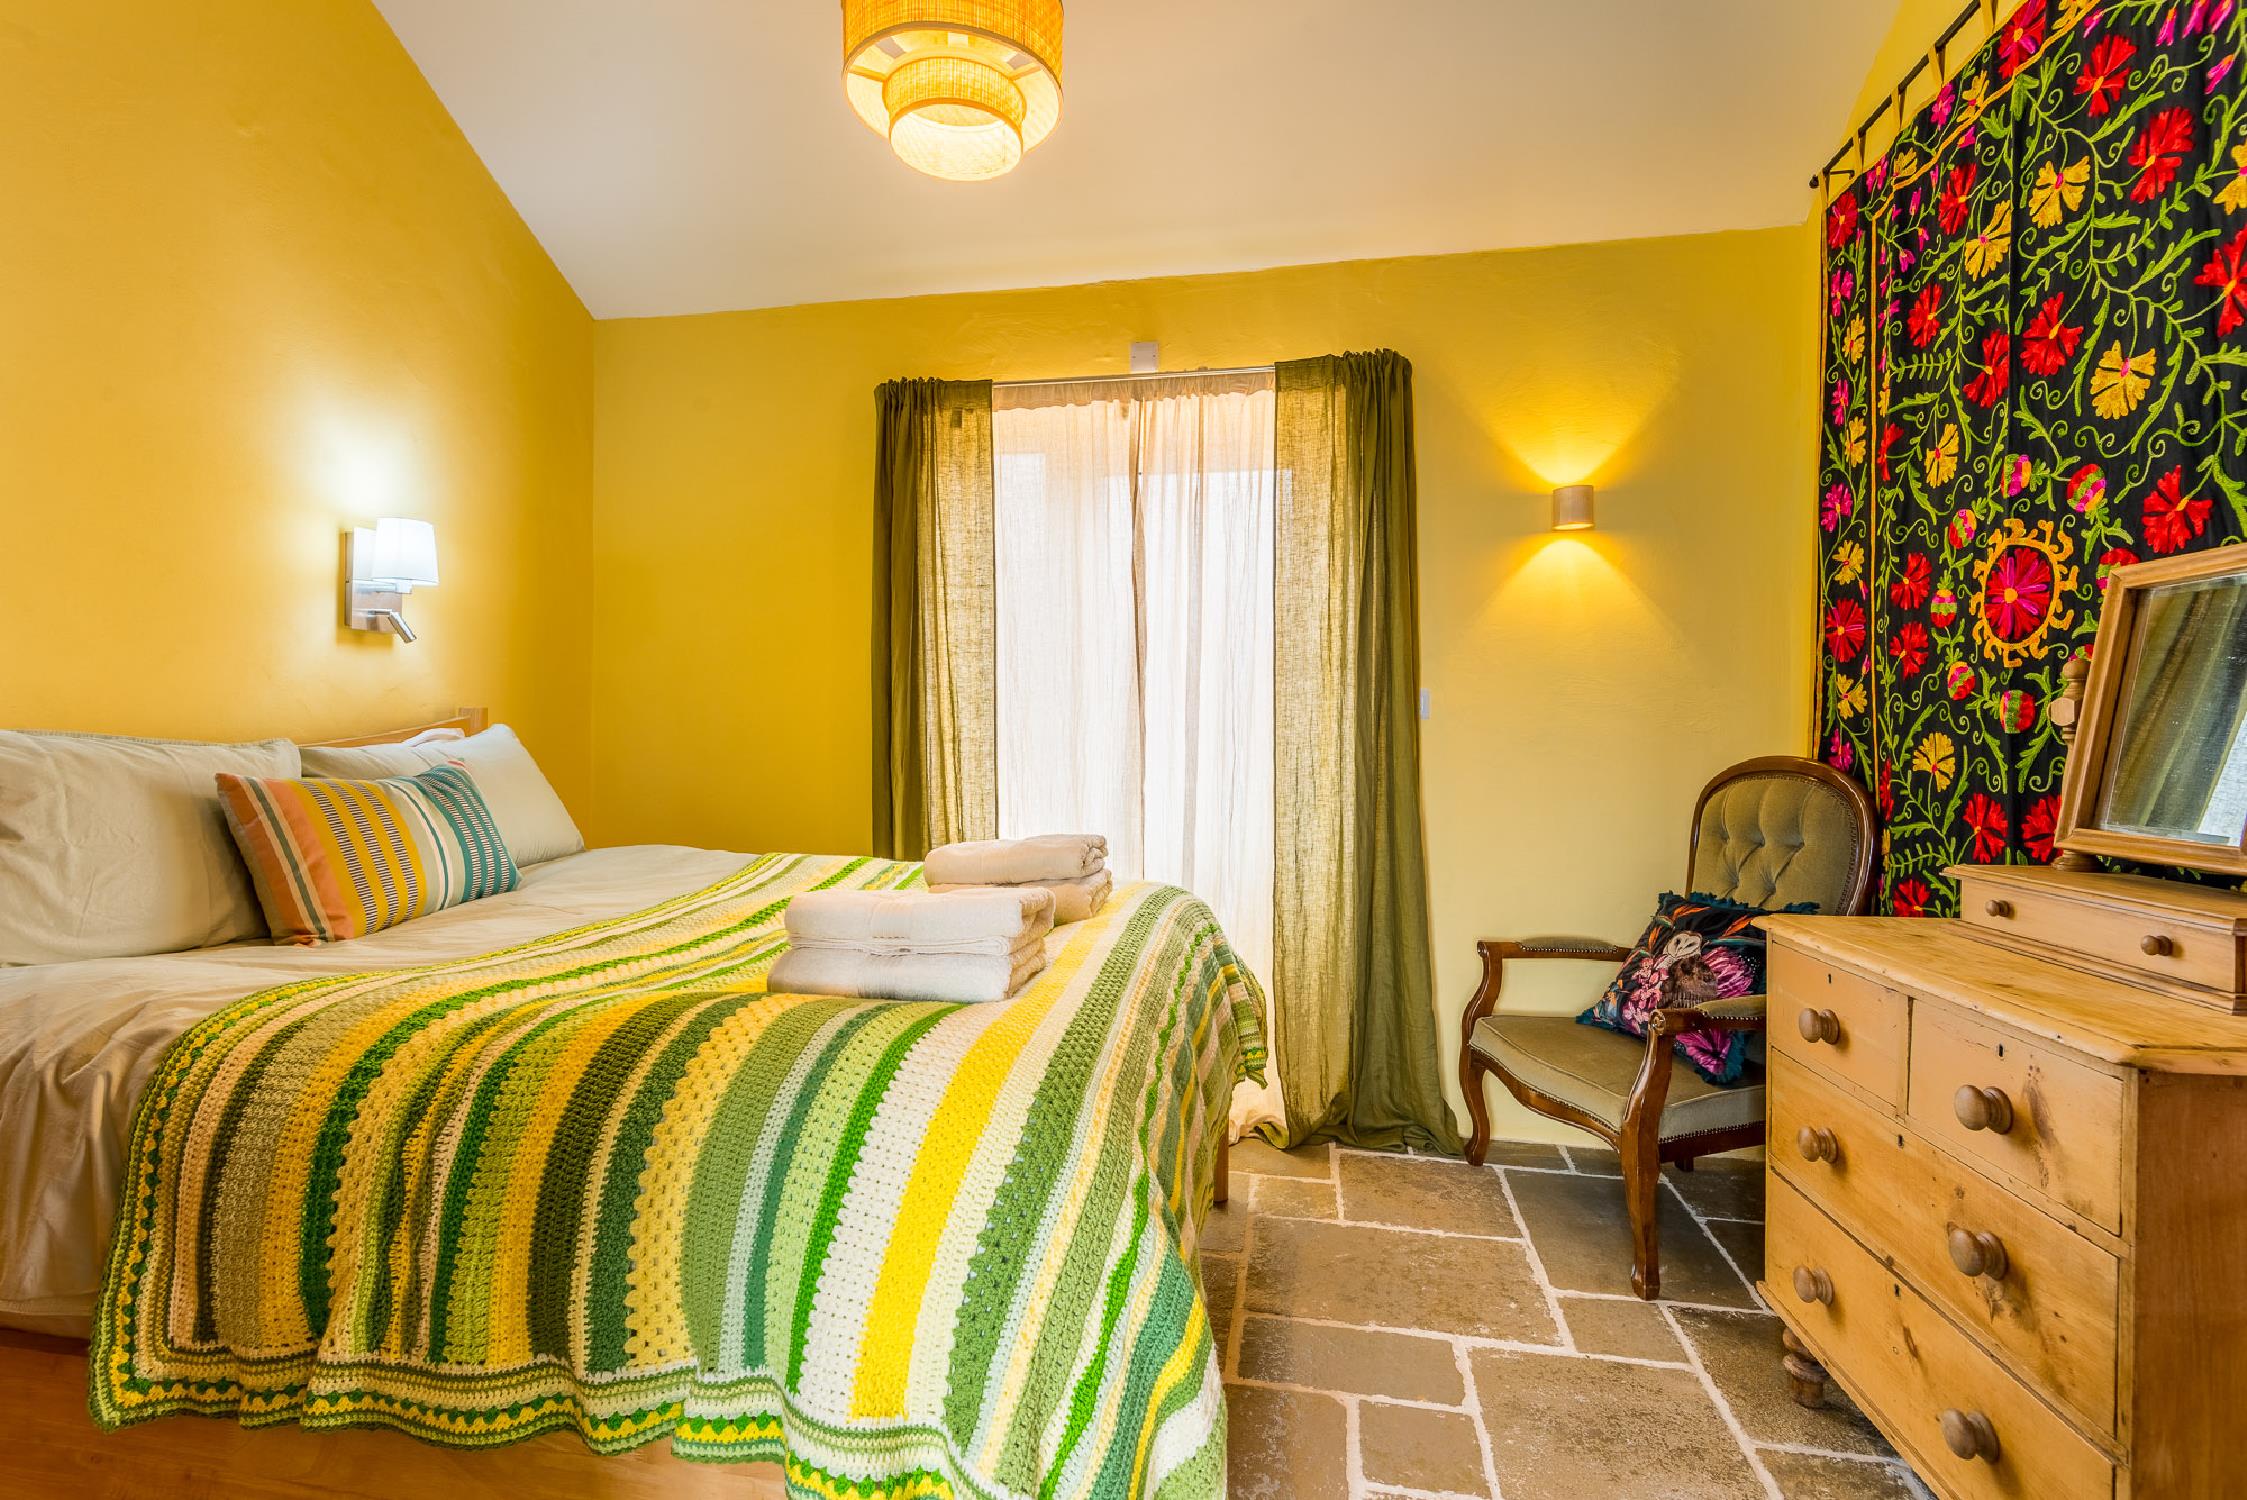 King size bed at sea view Blueberry Cottage Polrunny Farm holiday cottages Boscastle Cornwall